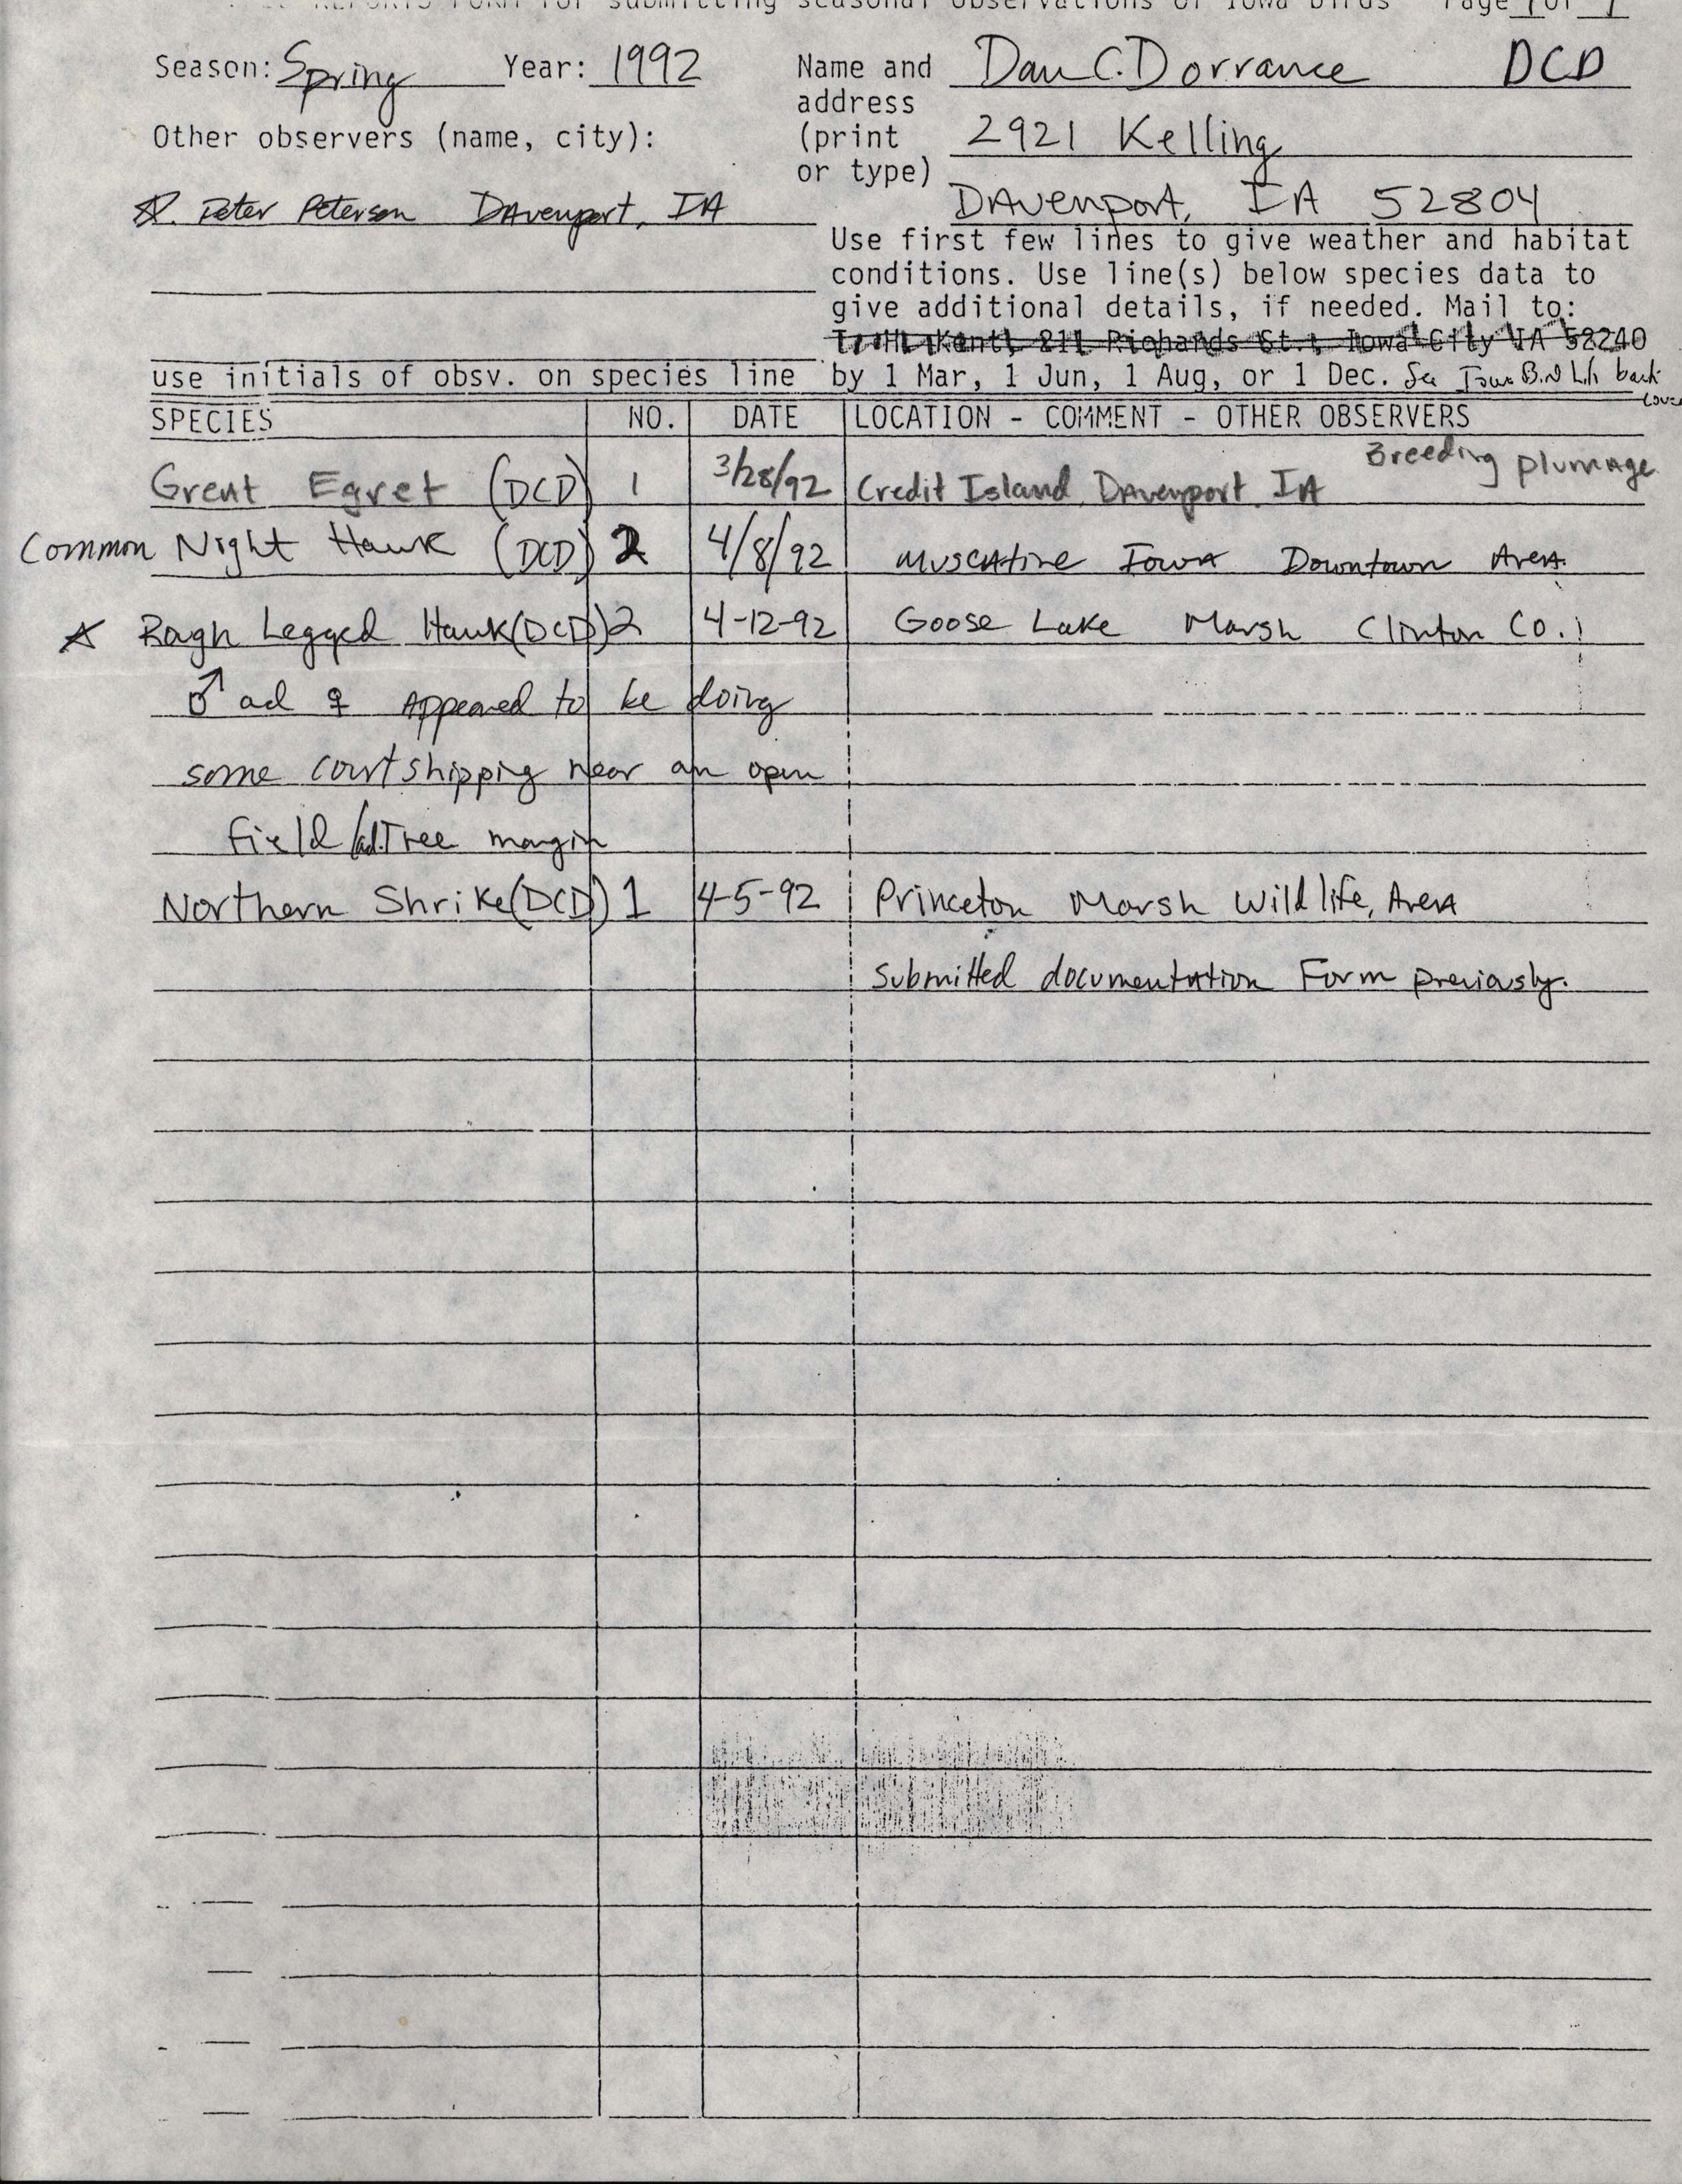 Field reports form for submitting seasonal observations of Iowa birds, Dan Dorrance, spring 1992